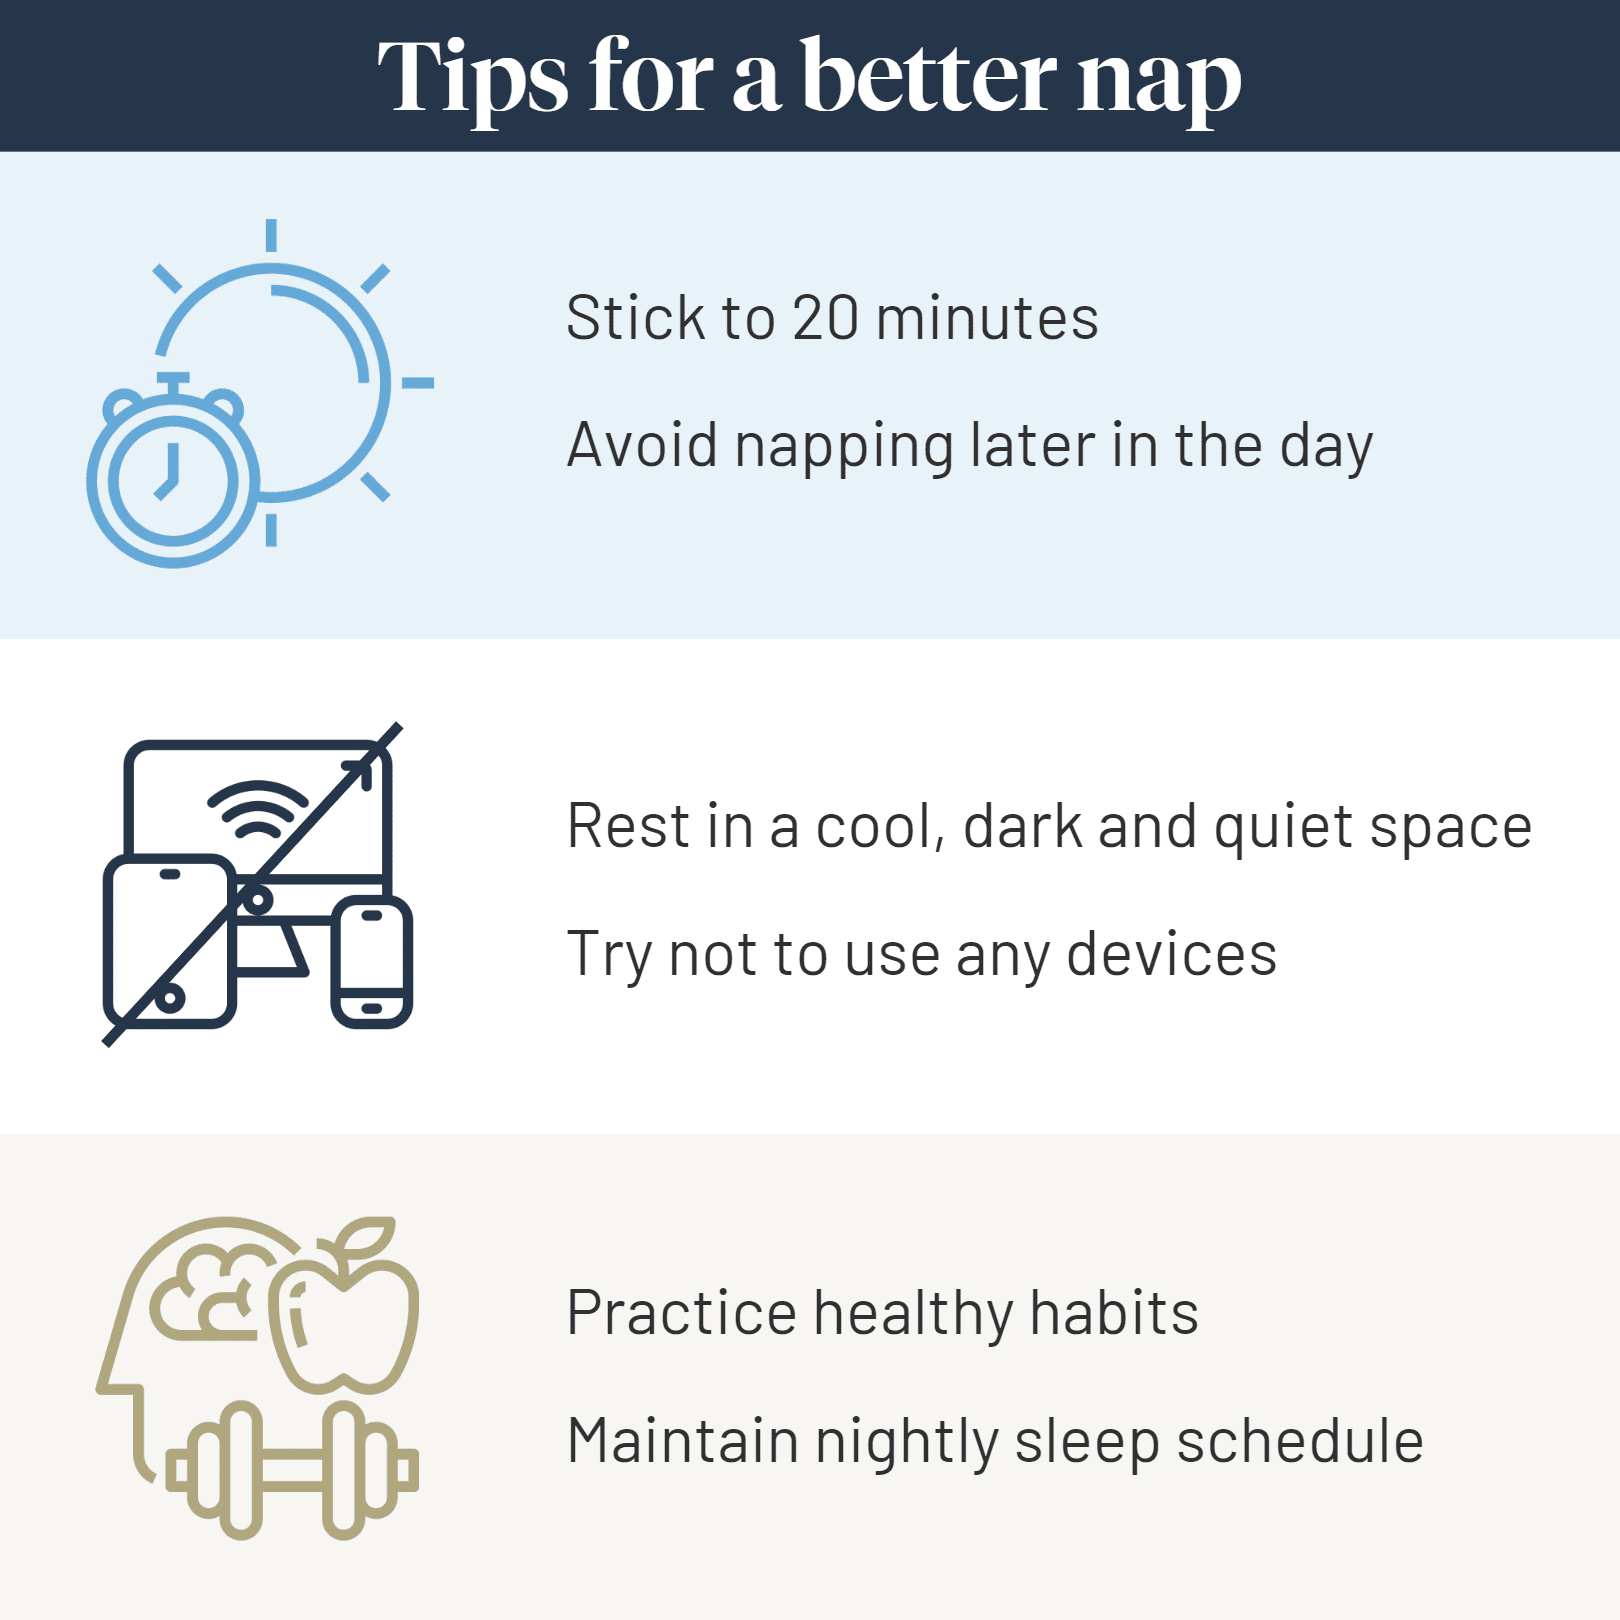 Tips for napping